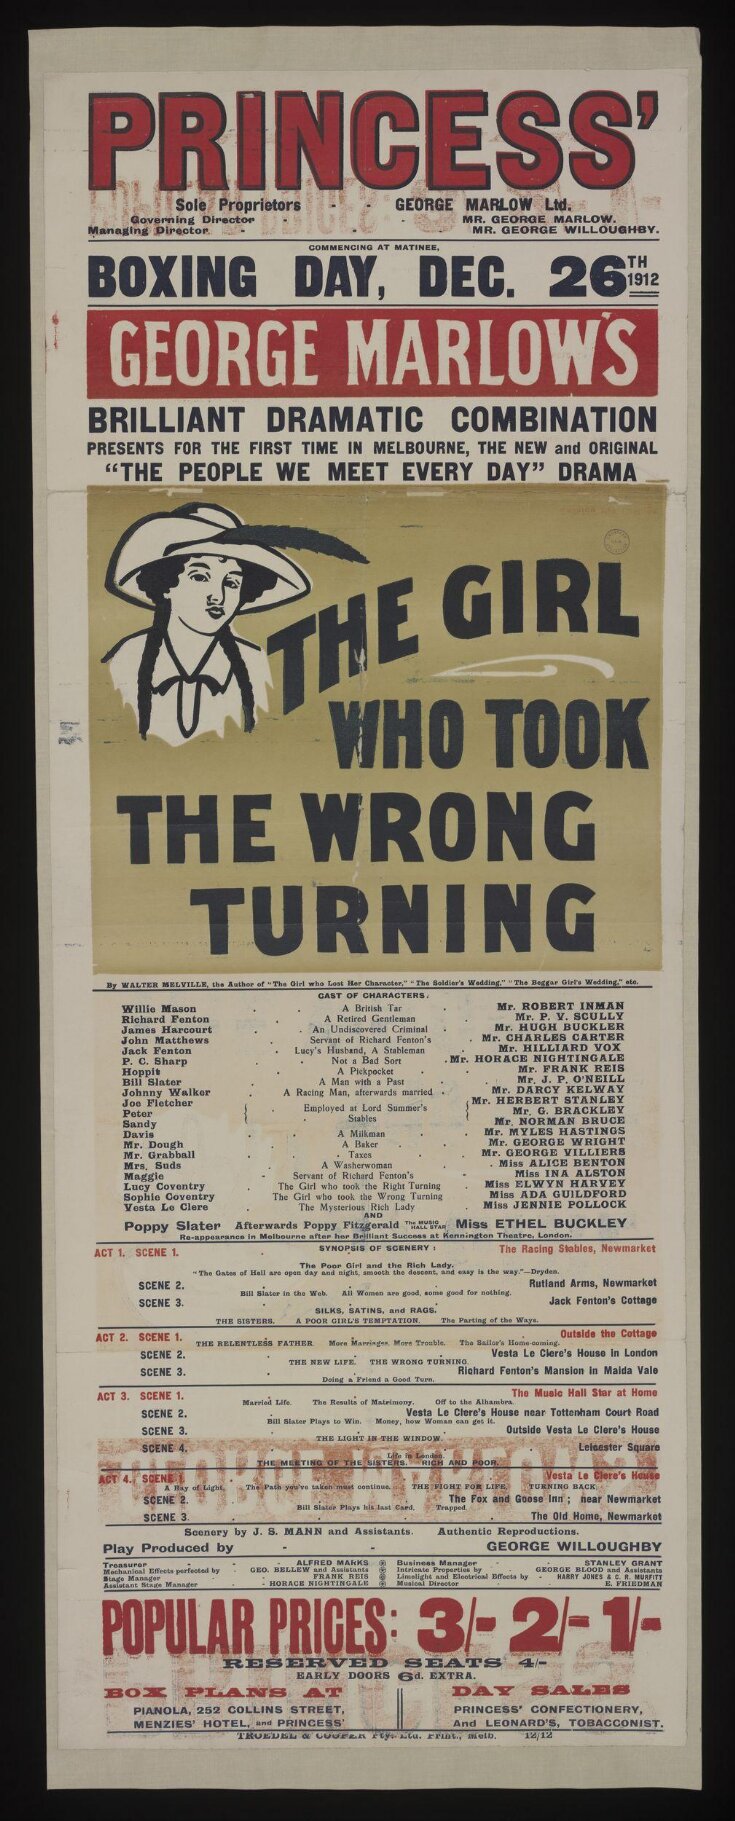 The Girl Who Took the Wrong Turning image